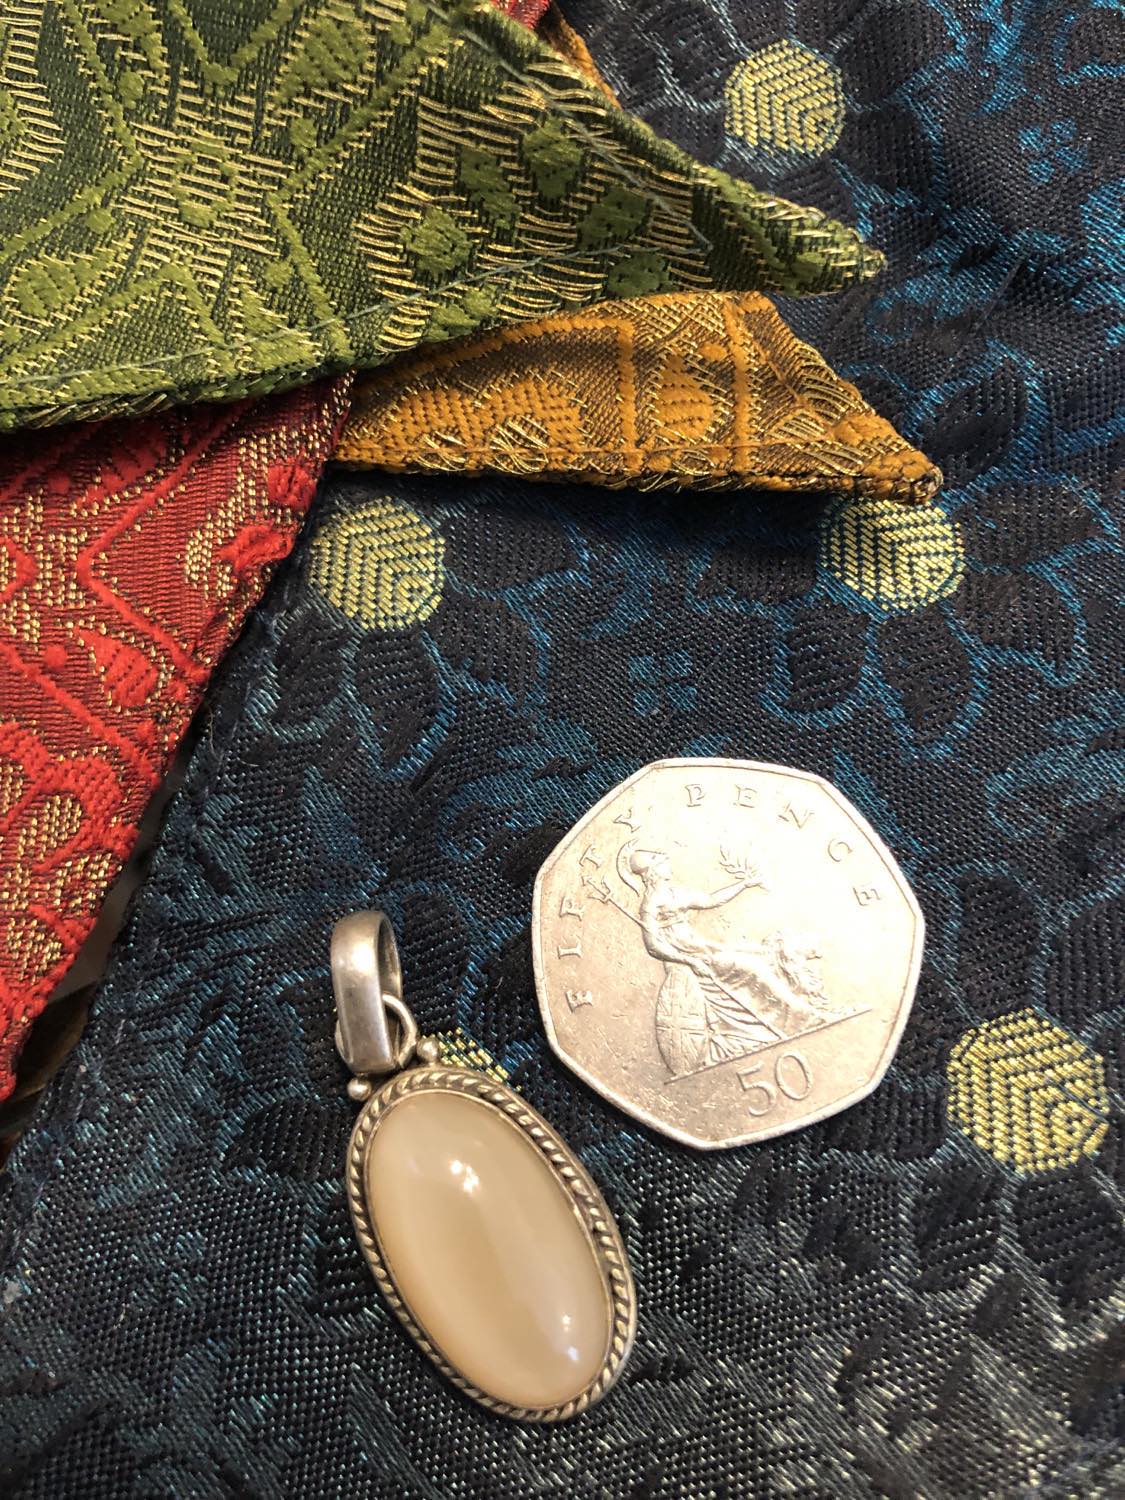 Moonstone and Silver Pendant